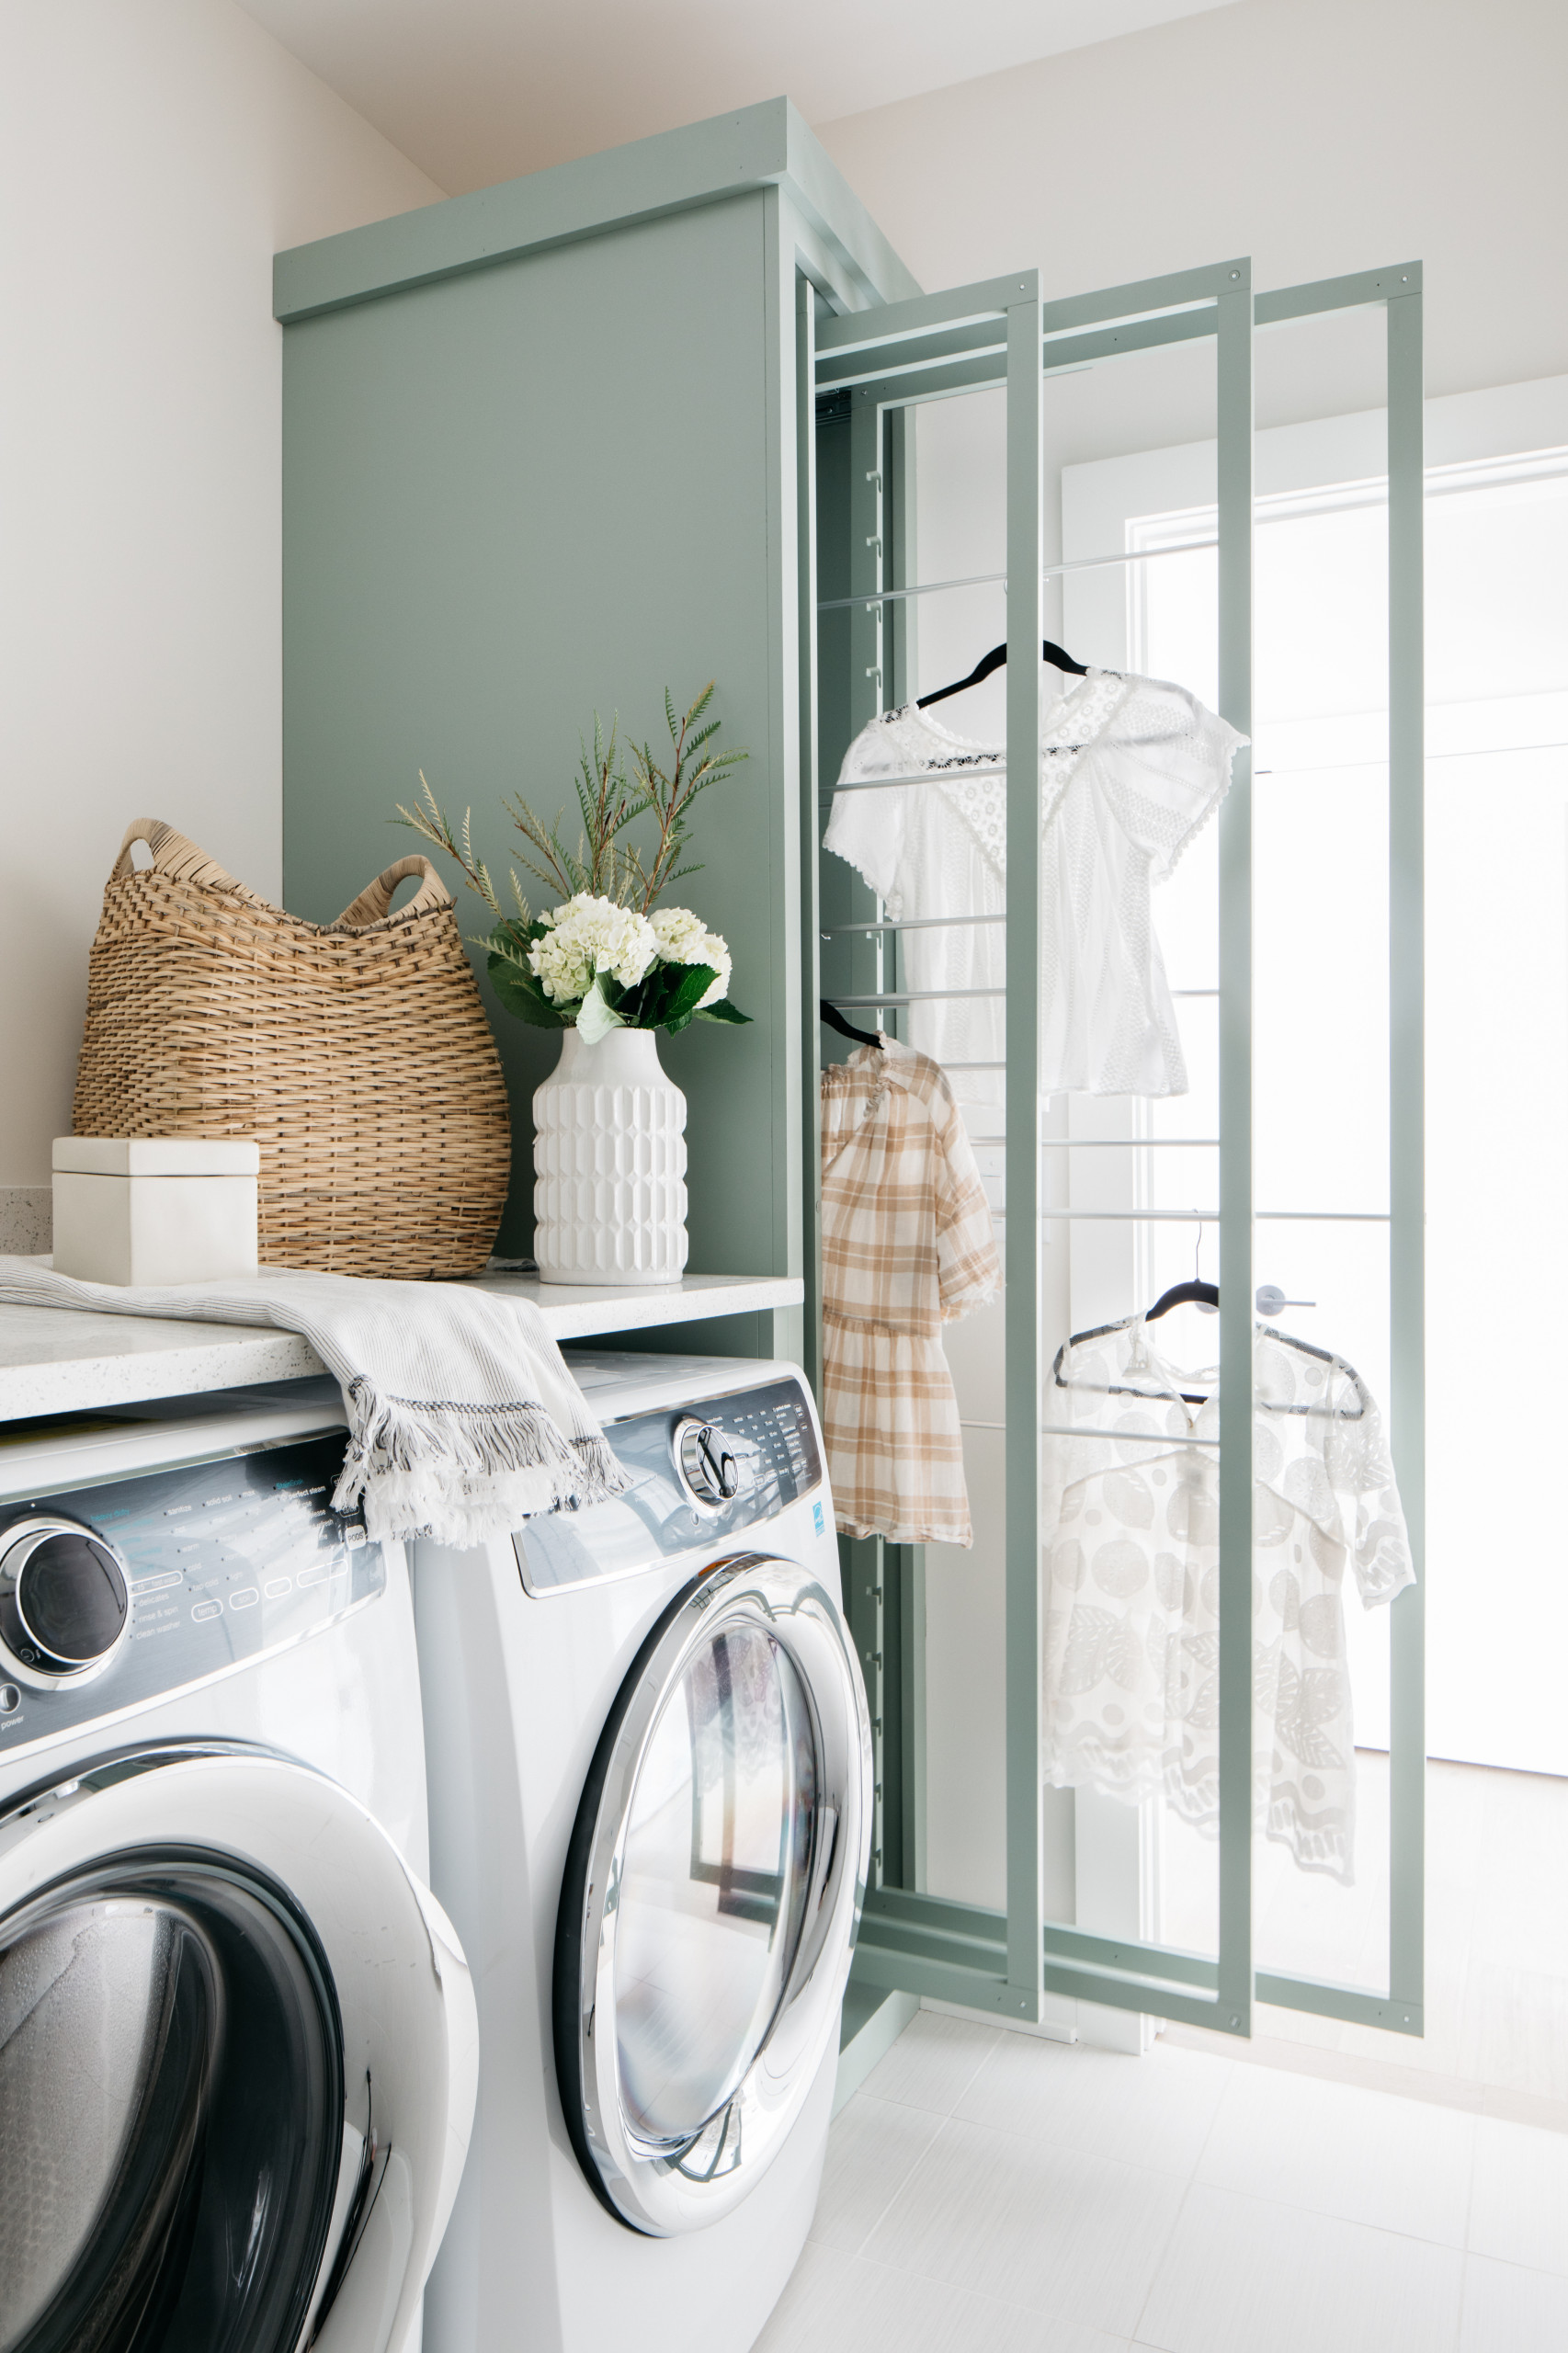 15 Stylish And Space-Saving Drying Racks You Need For Your Laundry Room